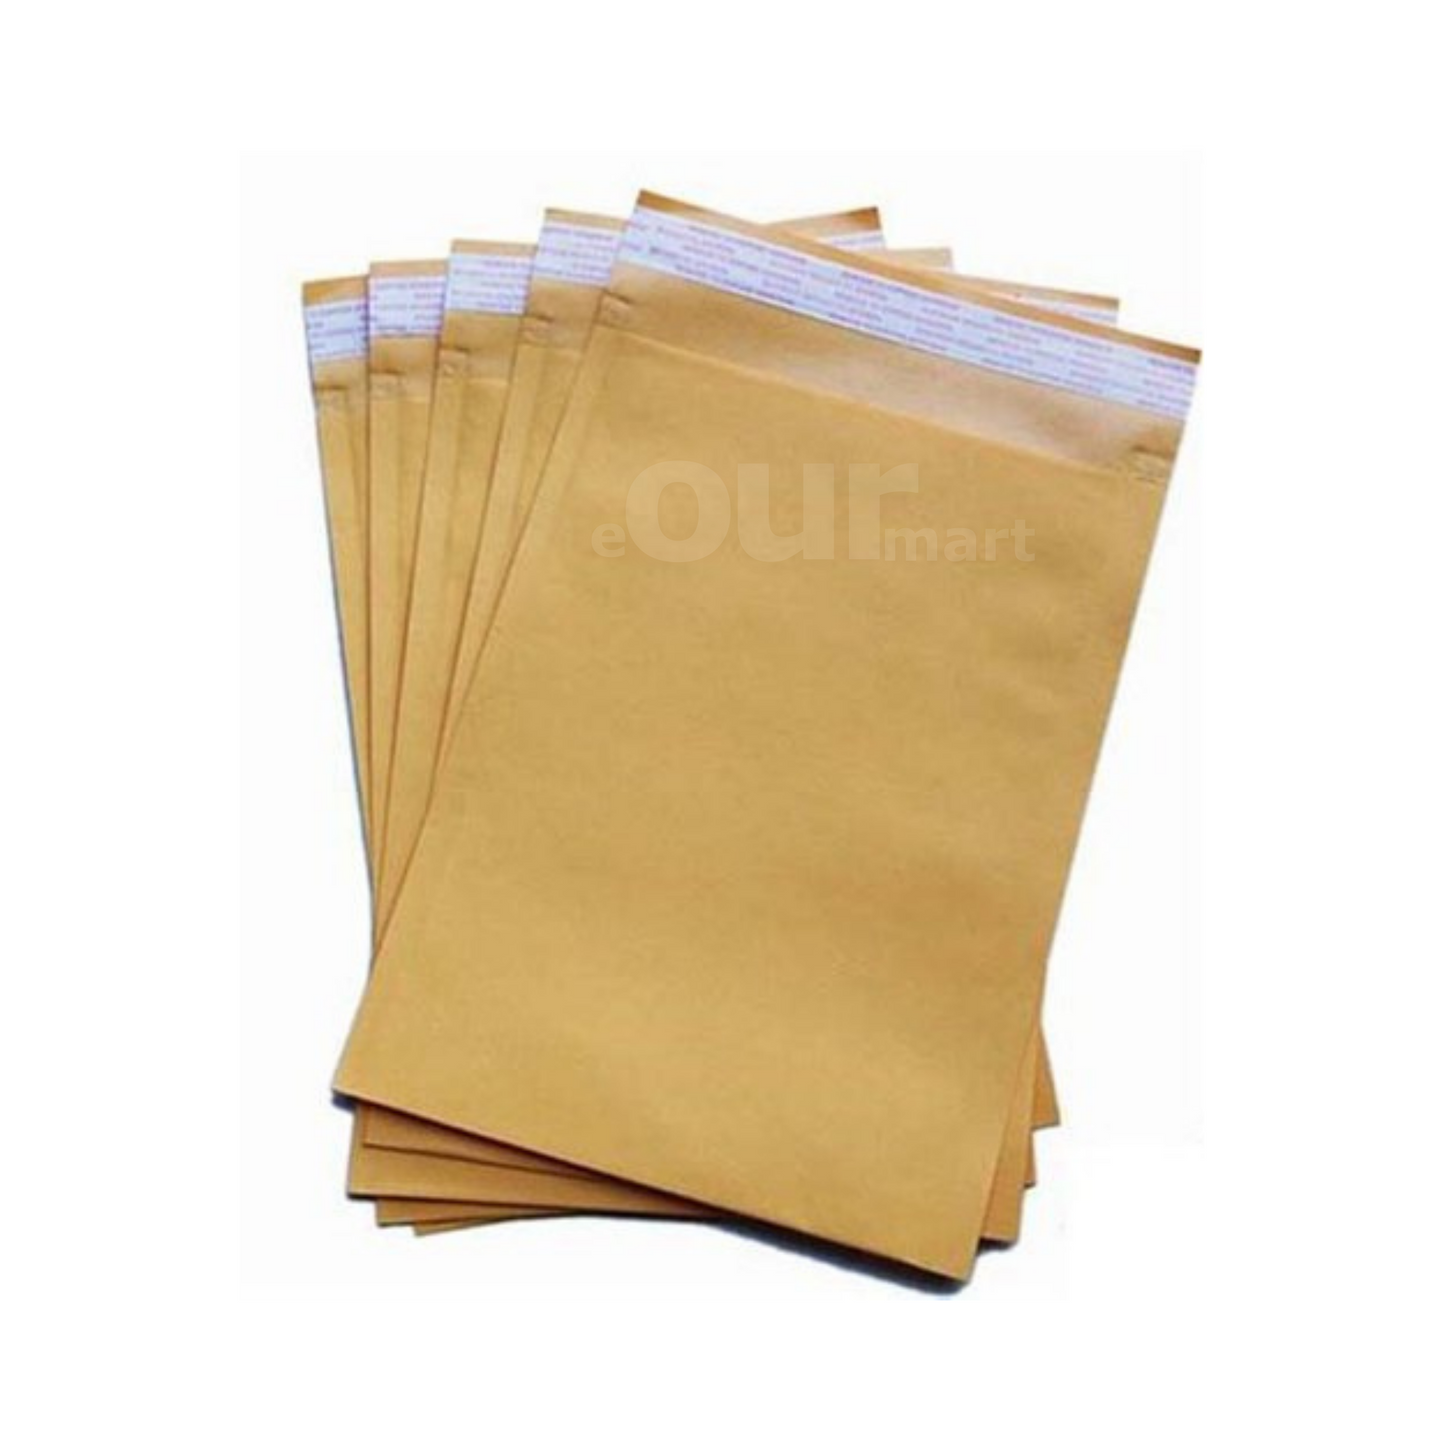 Paper Courier Bags, 16X20 Inches, (PB-4, 100 Bags)